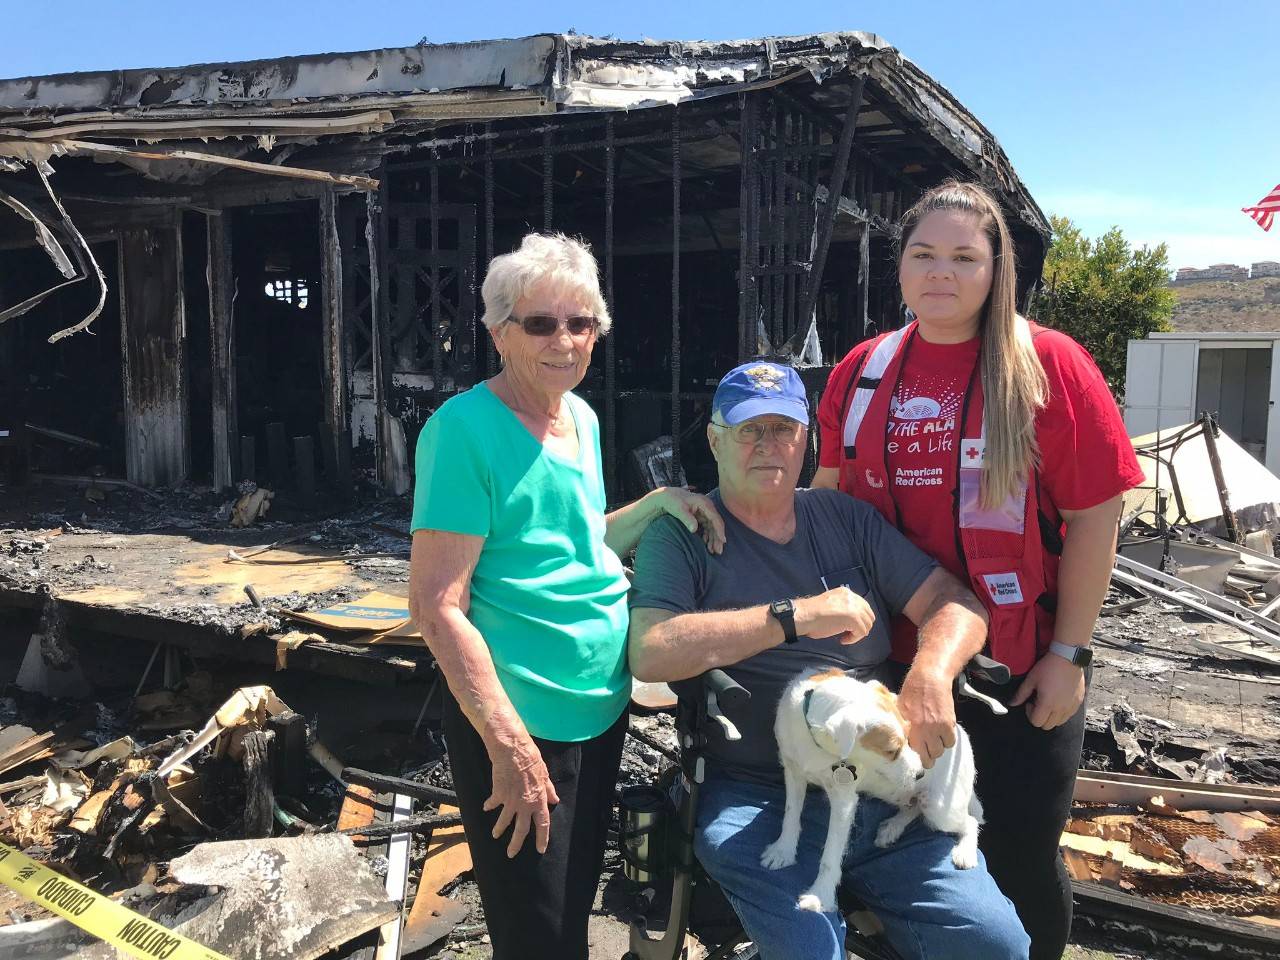 June 10, 2019. Santee, California. Jack and Shirley Reider escaped their burning mobile home with their sweet dog, Zoe, on the morning of May 29, 2019. Less than six months earlier, the American Red Cross had installed free smoke alarms   which sounded when their home caught fire   during a Sound the Alarm home fire safety event held in their mobile home park. During the Sound the Alarm event in December 2018, Natalie Lopez (pictured), a Red Cross regional philanthropy officer, had reviewed a home fire escape plan with Jack while two volunteers installed three new smoke alarms in the Reiders  home. In addition, Red Cross volunteers responded to the fire to address the family s urgent needs by providing immediate financial assistance and one-on-one casework recovery support. The family was also grateful for the support of a volunteer Red Cross nurse, who helped replace prescription medication that was lost in the fire. Following the fire, Jack said:  The important thing I take away from this is we were able to get out with our lives and our pup. You can replace things, but you can t replace a life.   He also shared the importance of being prepared to quickly escape:  I was a bomb disposal technician in the military and when you get engaged in fires like this, you don t have a lot of time. You may think you do   time slows down. In actuality, you better be on your way out the door.  Photo by Emily Cox/American Red Cross